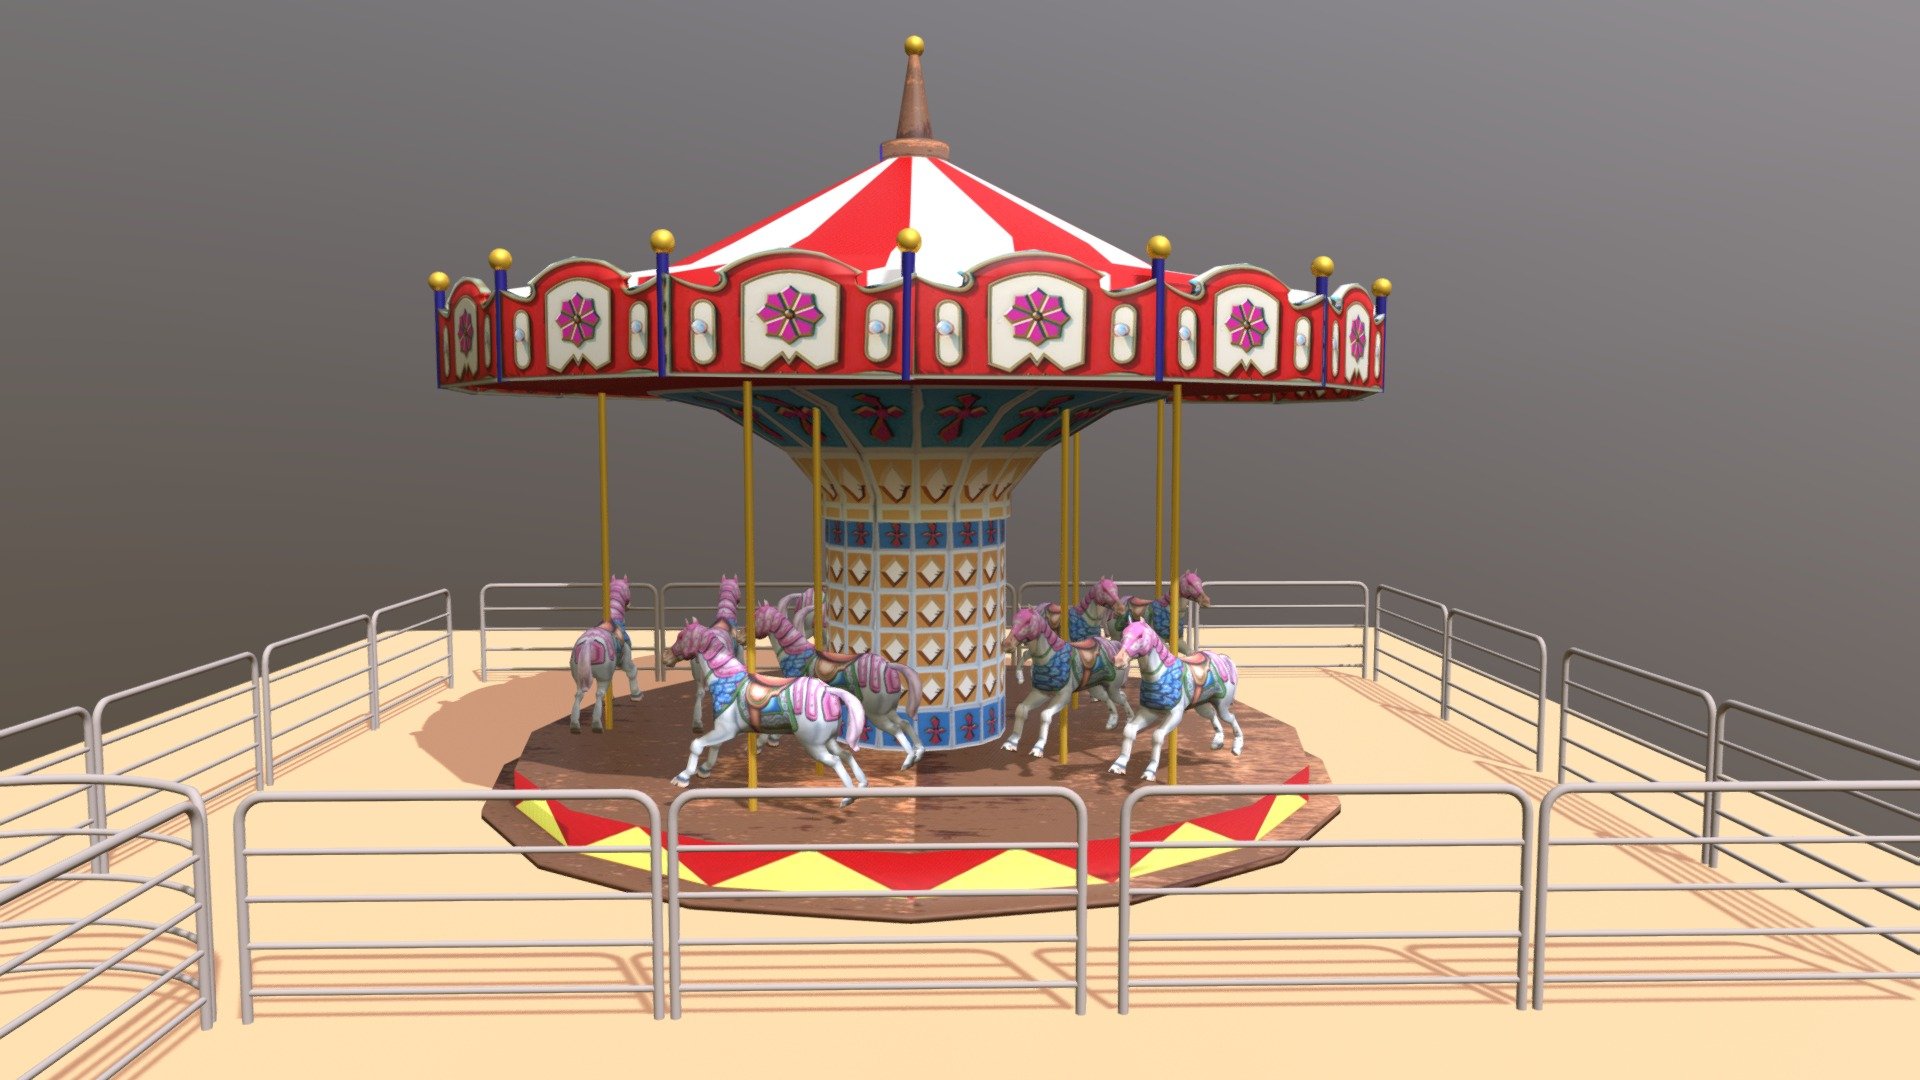 This Carousel is a medium quality model that will enhance detail and realism to any of your rendering projects. The model has a fully textured and detailed design that allows for close-up renders, and was originally modeled,texturized in Autodesk Maya 2022 and rendered with Arnold. The model have Uvs done and it contains all the textures.

This zip contains the .mb file, the .fbx  and textures 3d model